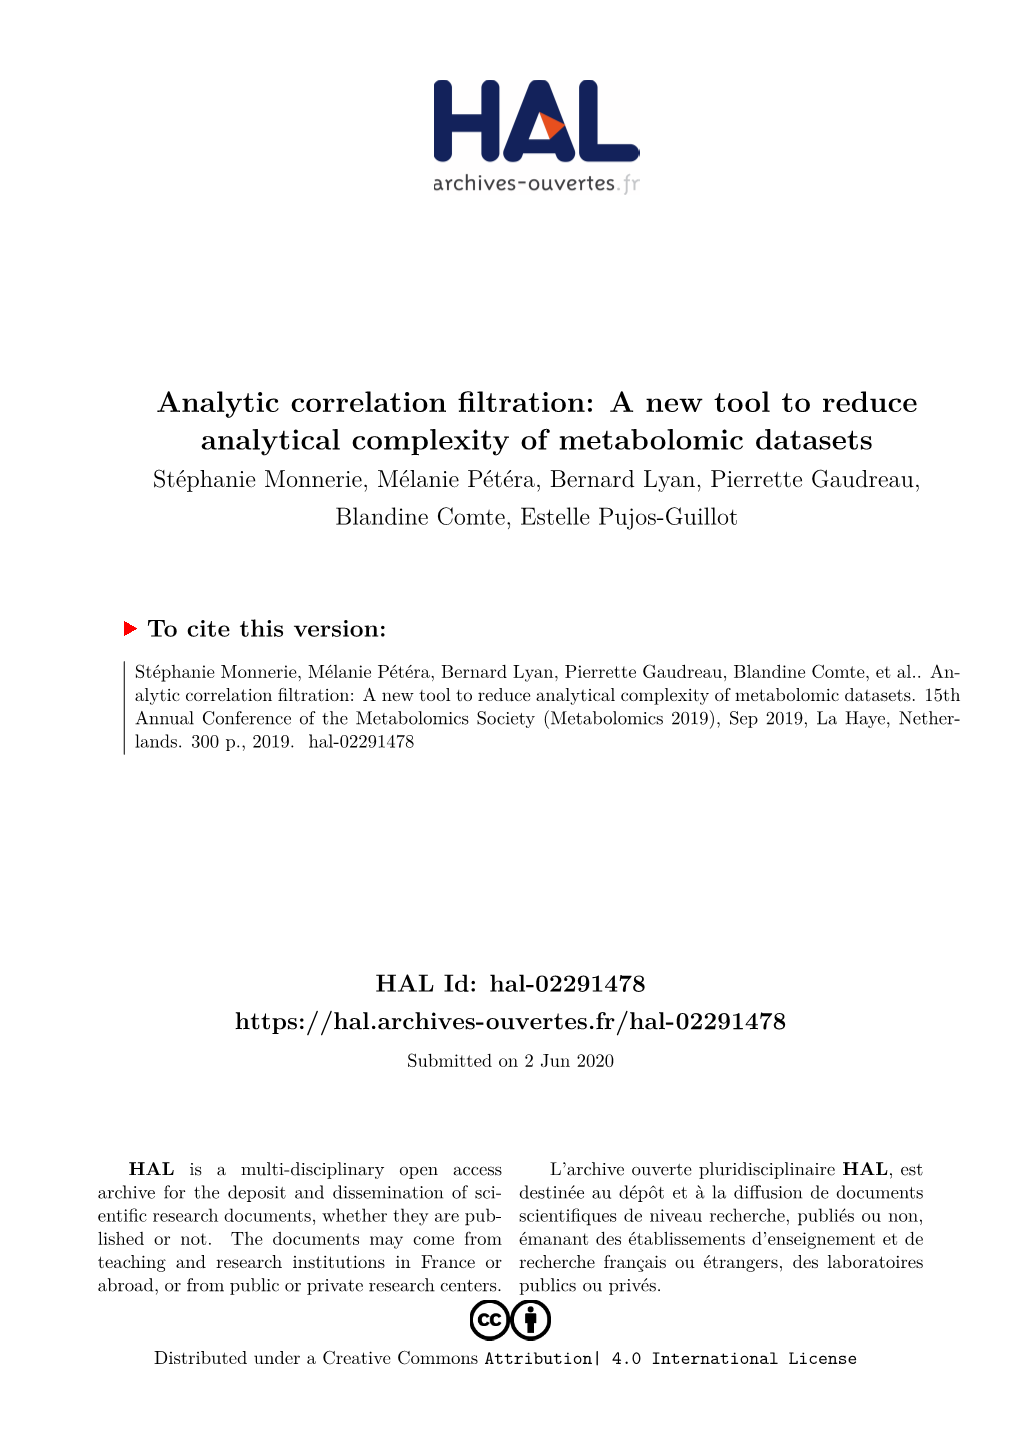 A New Tool to Reduce Analytical Complexity of Metabolomic Datasets